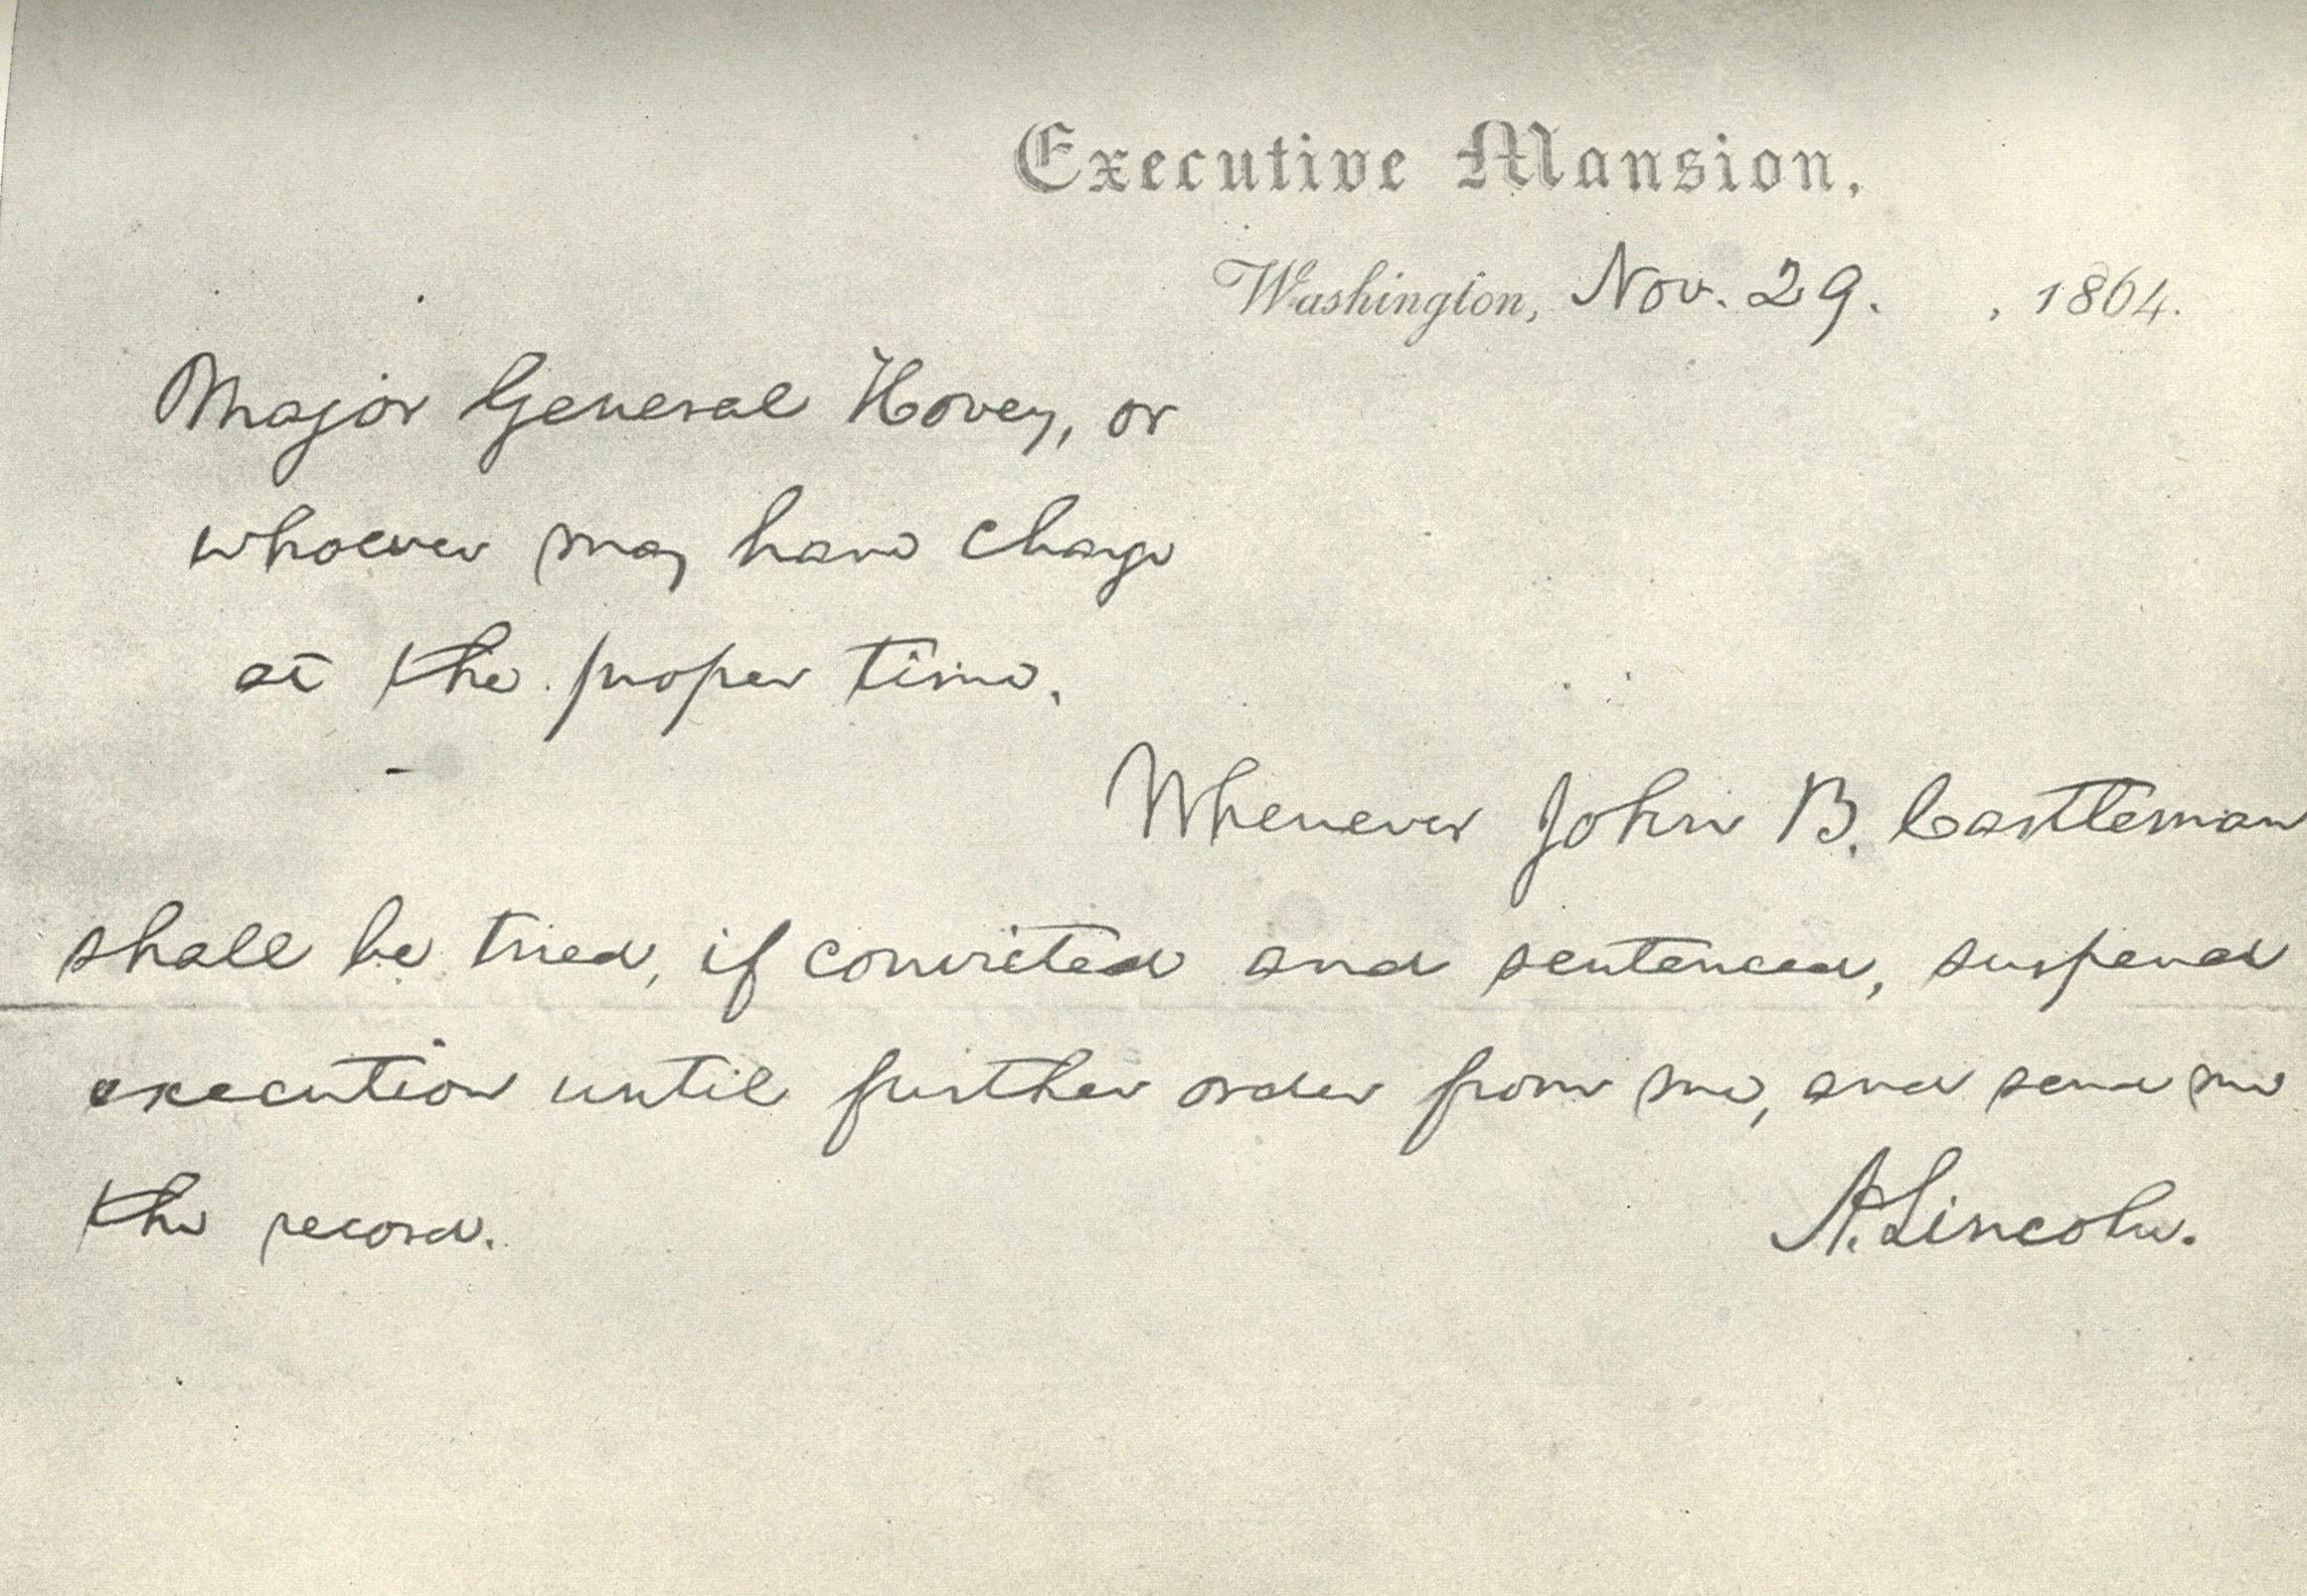 An order from President Lincoln spared Castleman's life: "Whenever John B. Castleman shall be tried, convicted and sentenced, suspend execution until further orders from me, and send me the record."